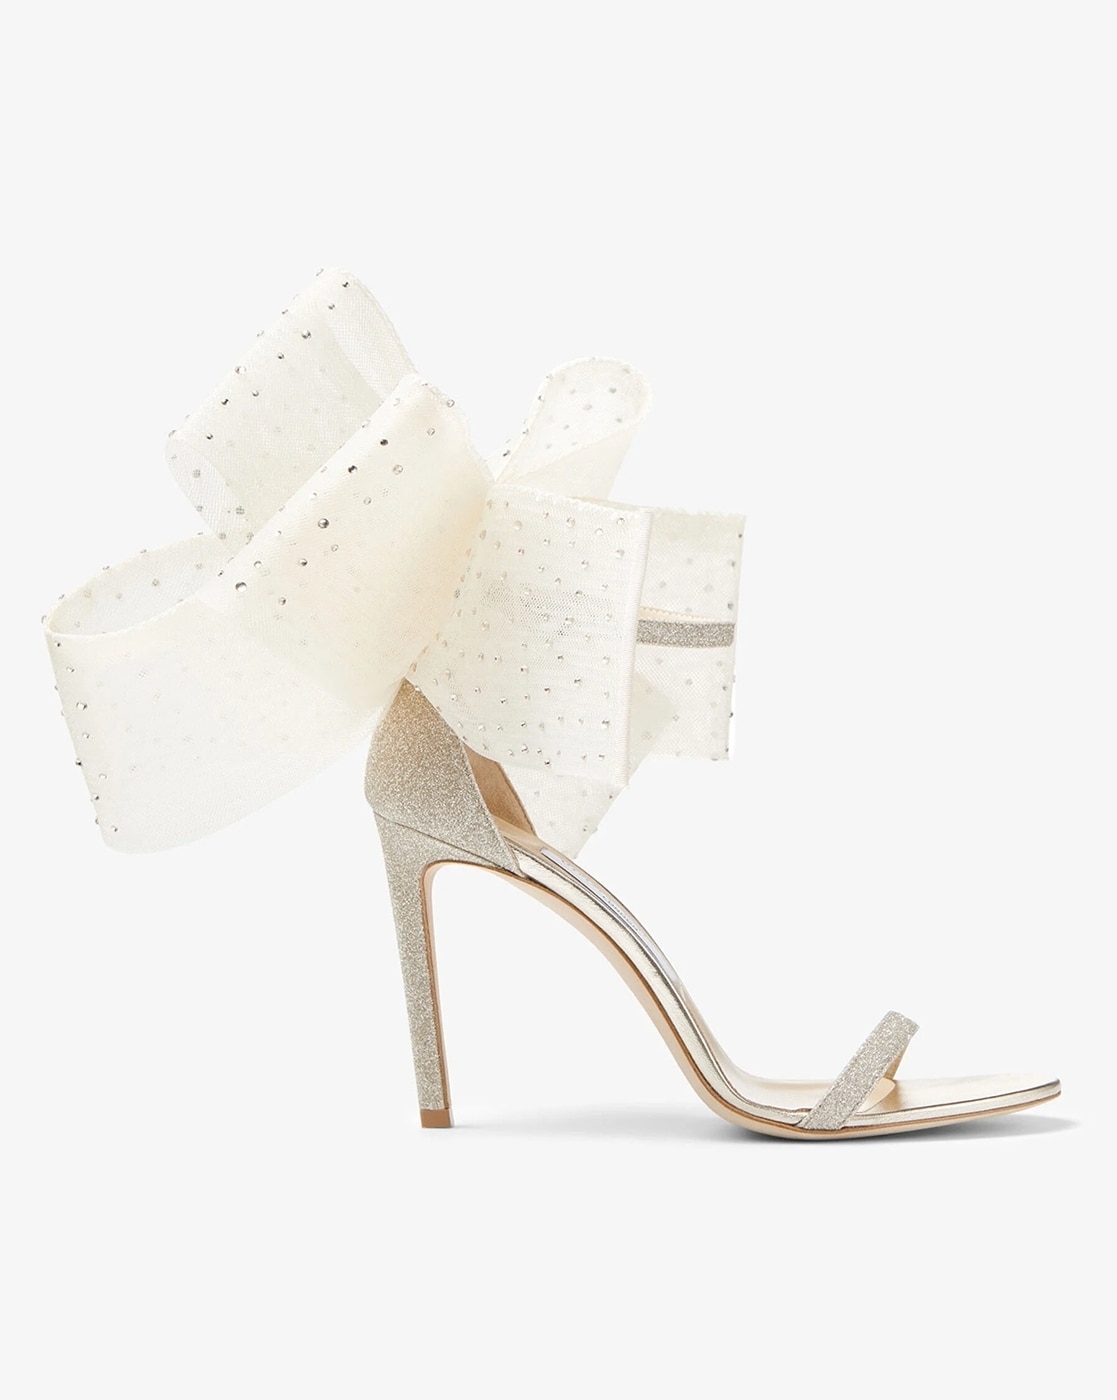 Evening Glamour | Women's Designer Shoes and Handbags | JIMMY CHOO